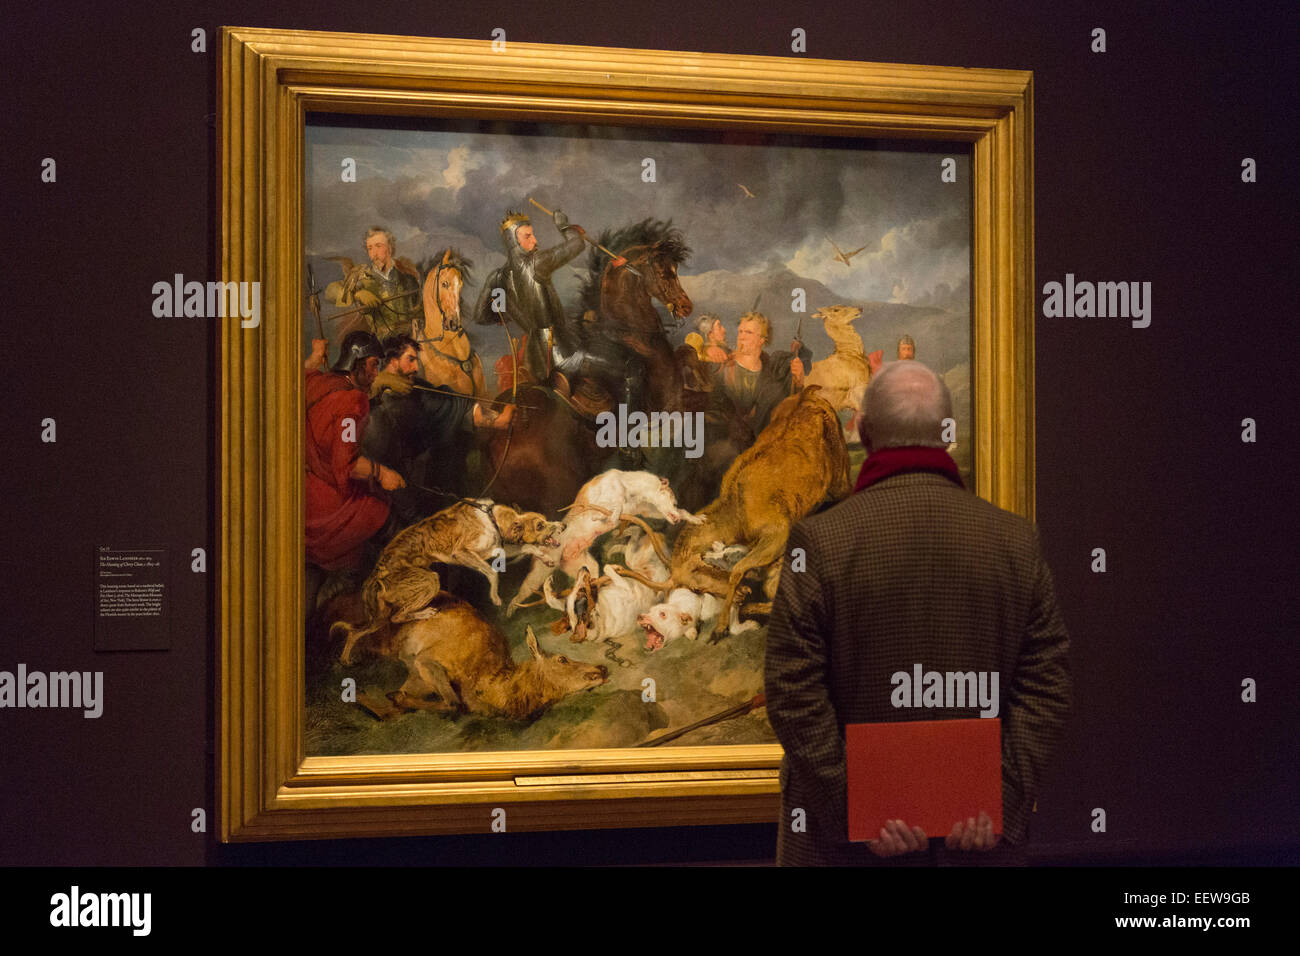 London, UK. 20 January 2015. A visitor to the exhibition stands in front of the painting 'The Hunting of Chevy Chase', 1825-26, by Sir Edwin Landseer. The exhibition Rubens and His Legacy: Van Dyck to Cezanne is an exploration of the artistic legacy of Peter Paul Rubens, the most influencial of Flemish painters. The exhibition brings together masterpieces by Rubens and the artists who were inspired by him during his lifetime and up until the twentieth century. Rubens and His Legacy presents over 130 works, comprising paintings, drawings and prints. The exhibition runs at the Royal Academy of A Stock Photo